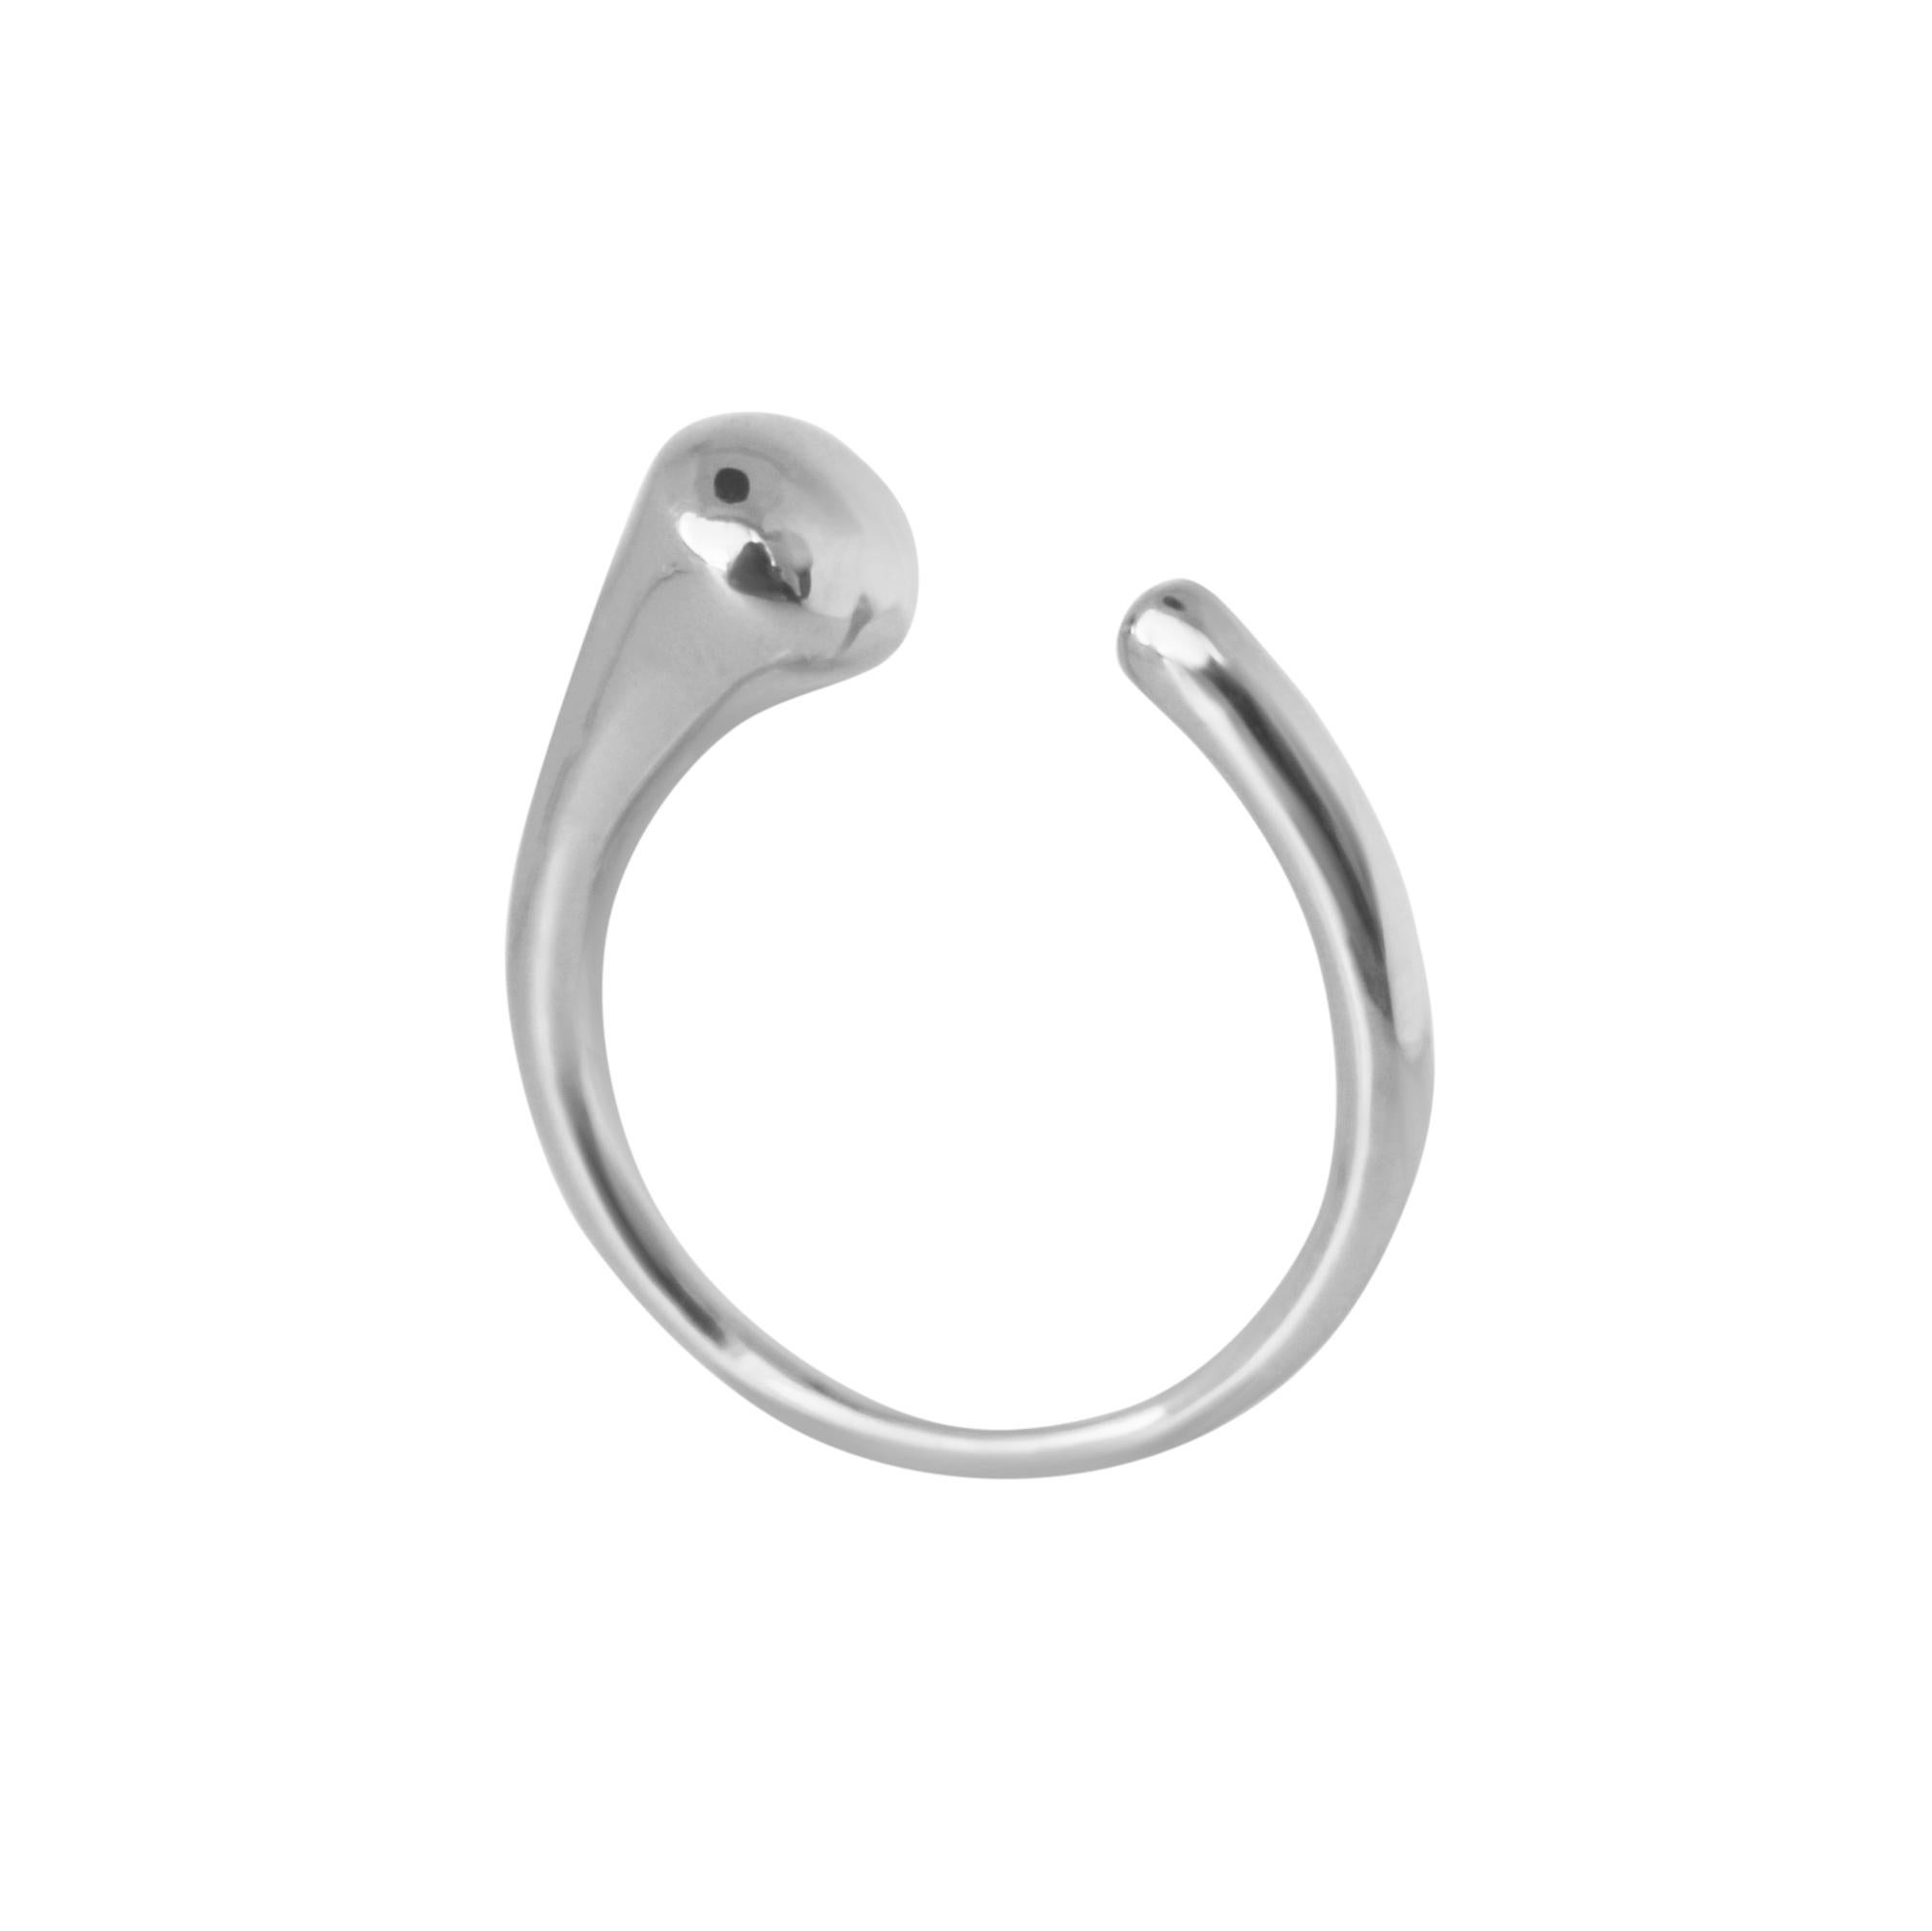 Unisex open ring. Sleek design defined by the boldness of sterling silver. Perfect worn solo or stacked with multiple rings from the same collection. Metal: sterling silver; Finish: polished
Size UK M & P are in stock, more sizes available upon